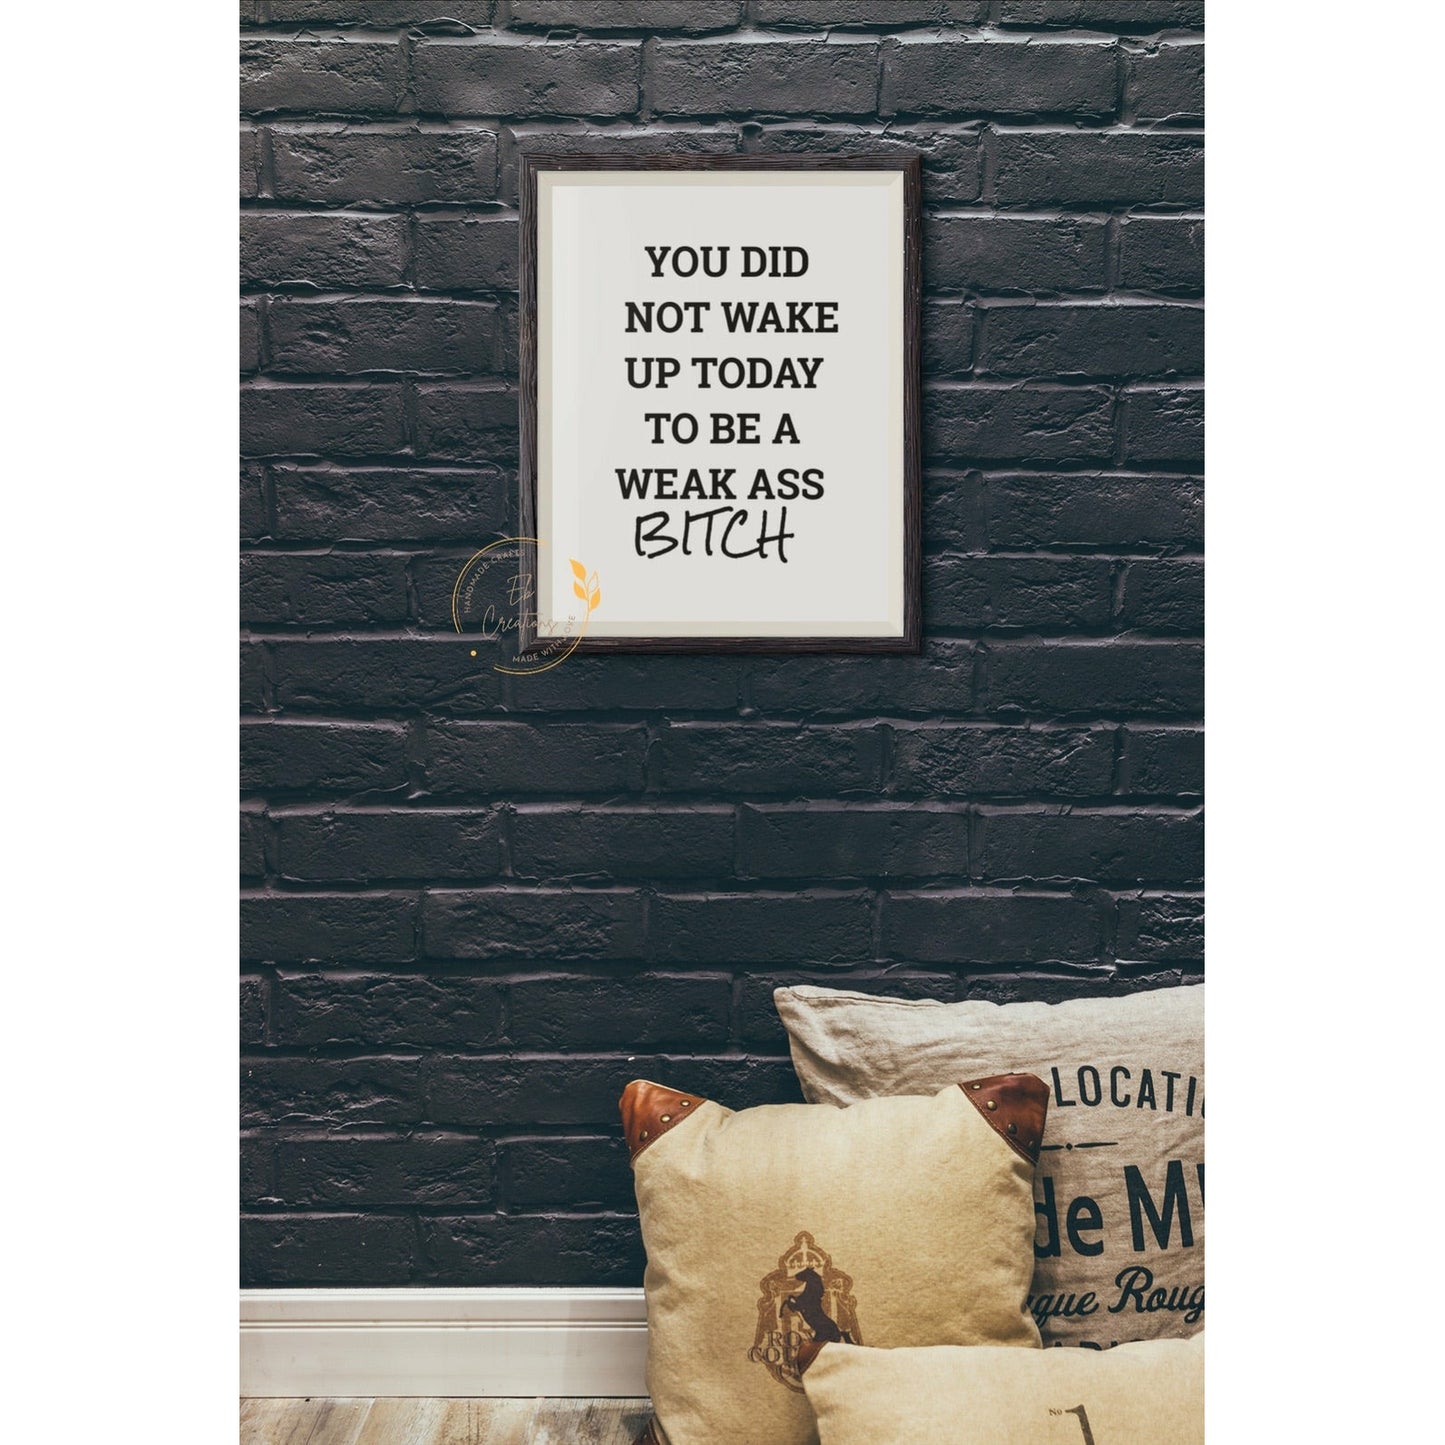 You did not wake up to be a weak ass bitch | Wall Art | Motivational Quotes | - Eb Creations Posters, Prints, & Visual Artwork You did not wake up to be a weak ass bitch | Wall Art | Motivational Quotes |